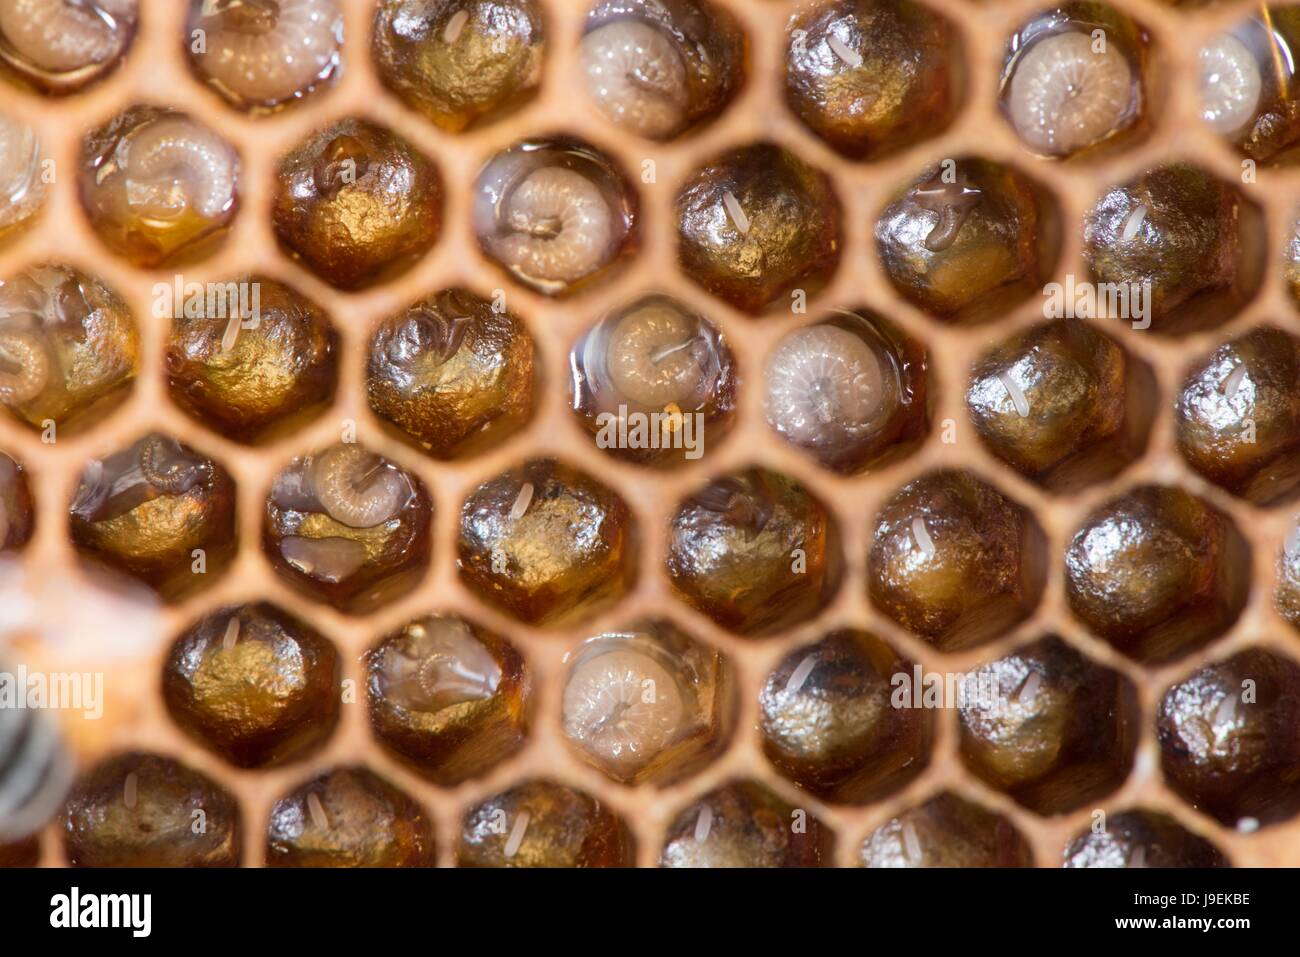 Close up view of Honey Bee comb showing larvae in cells Stock Photo